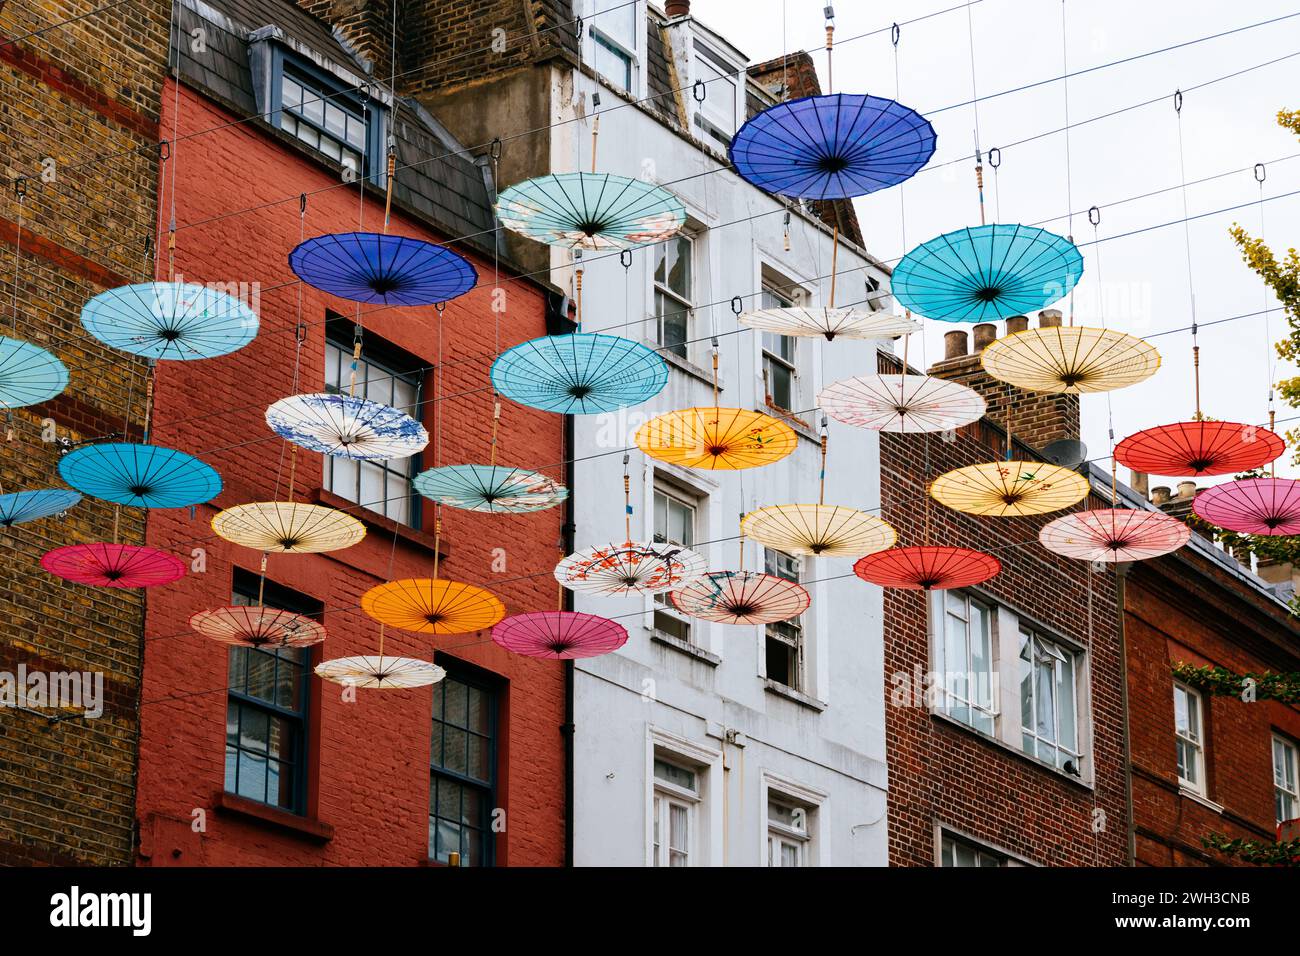 Colorful umbrellas hanging over street in Chinatown in Soho, London Stock Photo